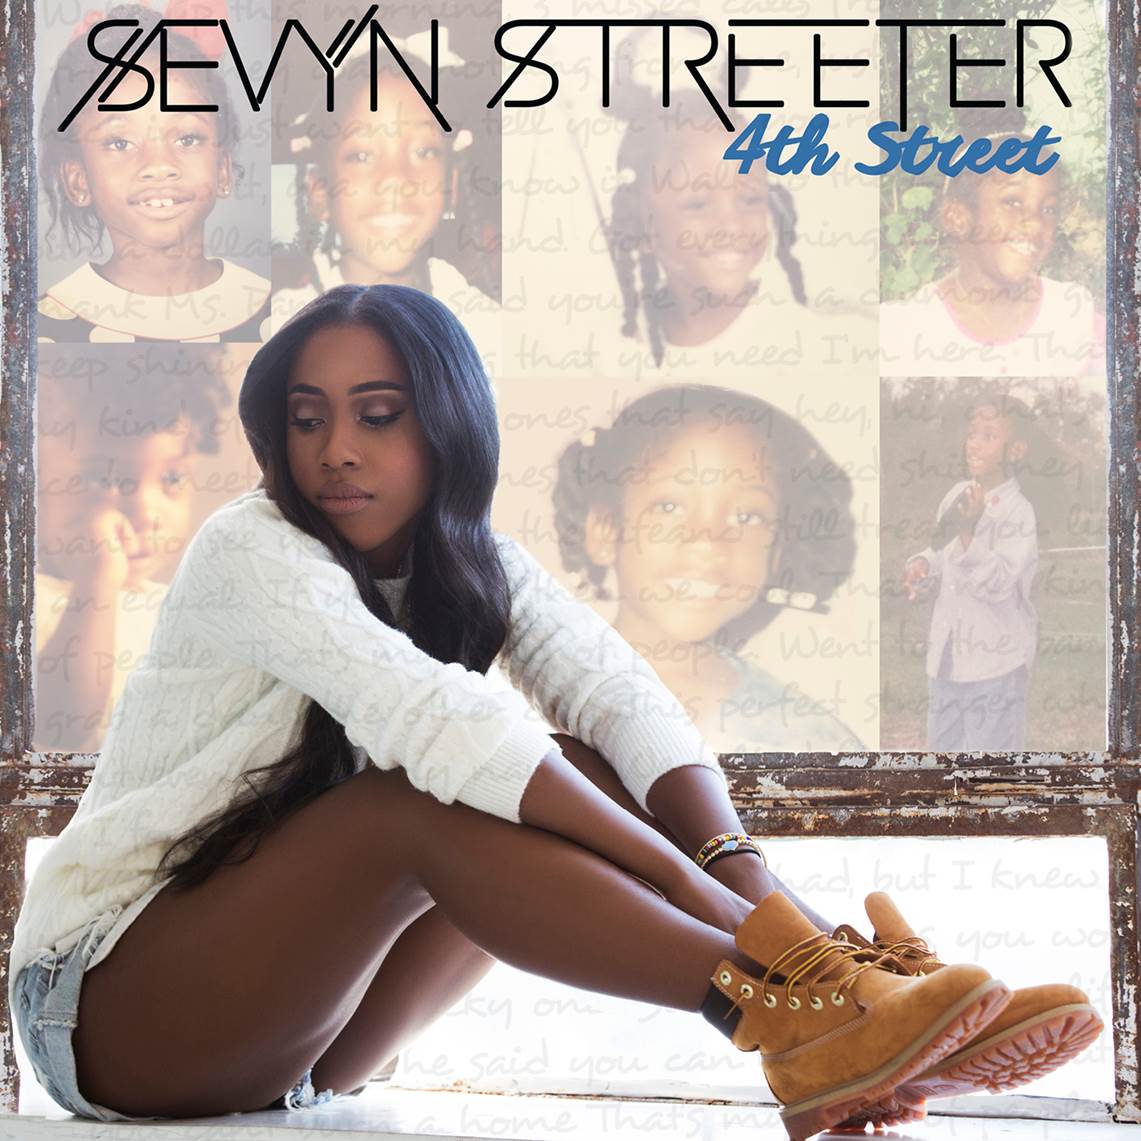 Sevyn Streeter Takes Us Home in New Video for '4th Street'